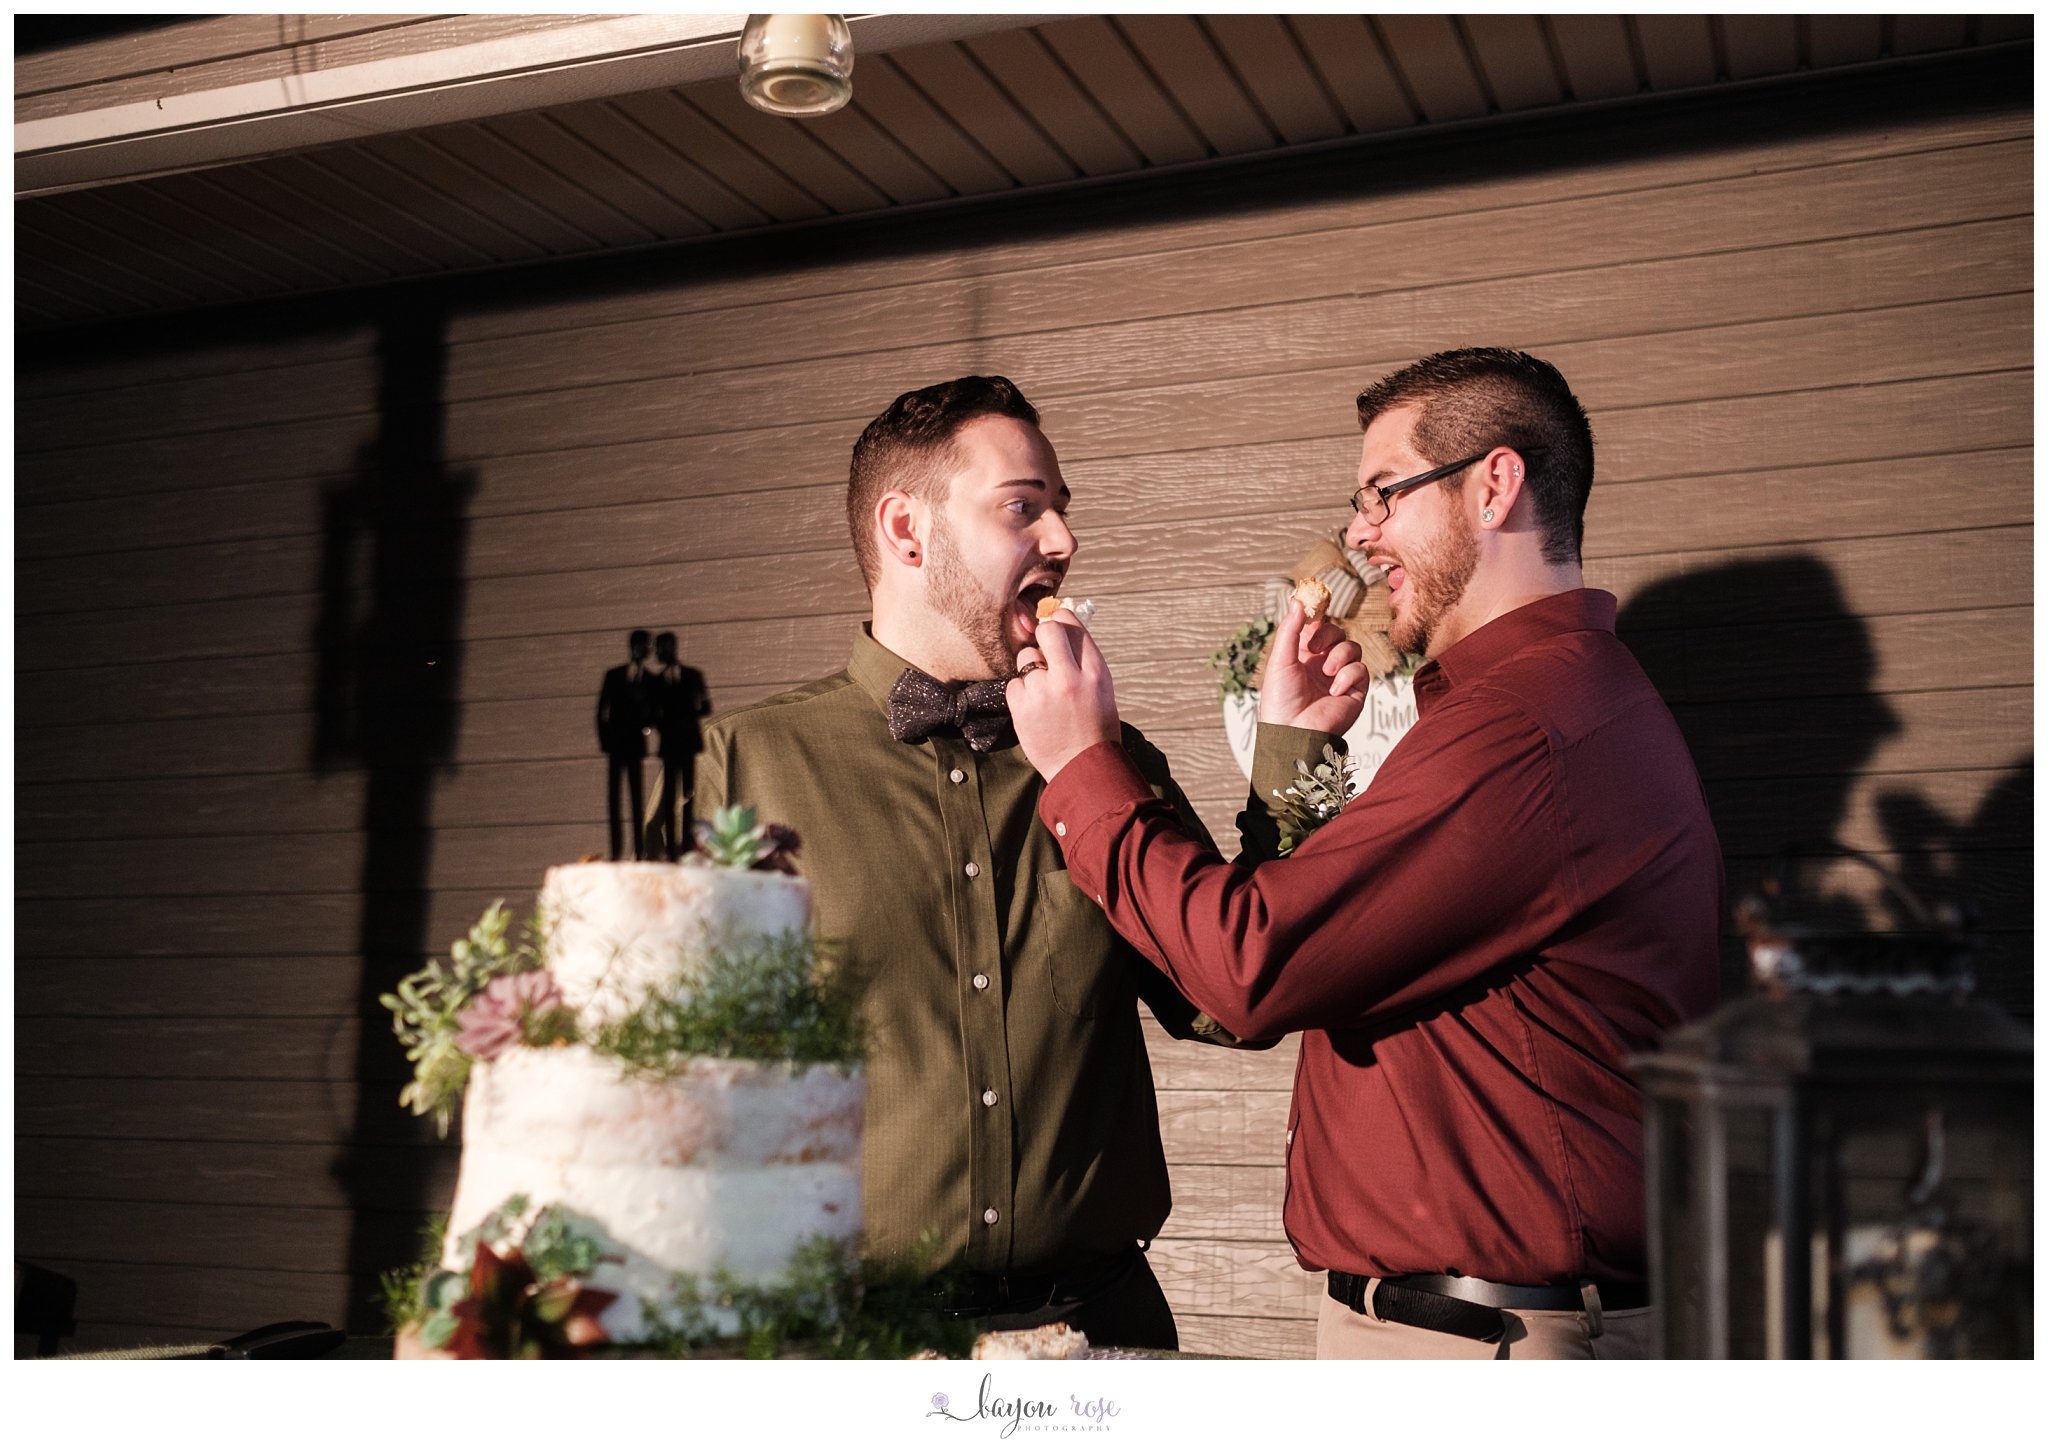 two grooms feeding each other cake at wedding reception